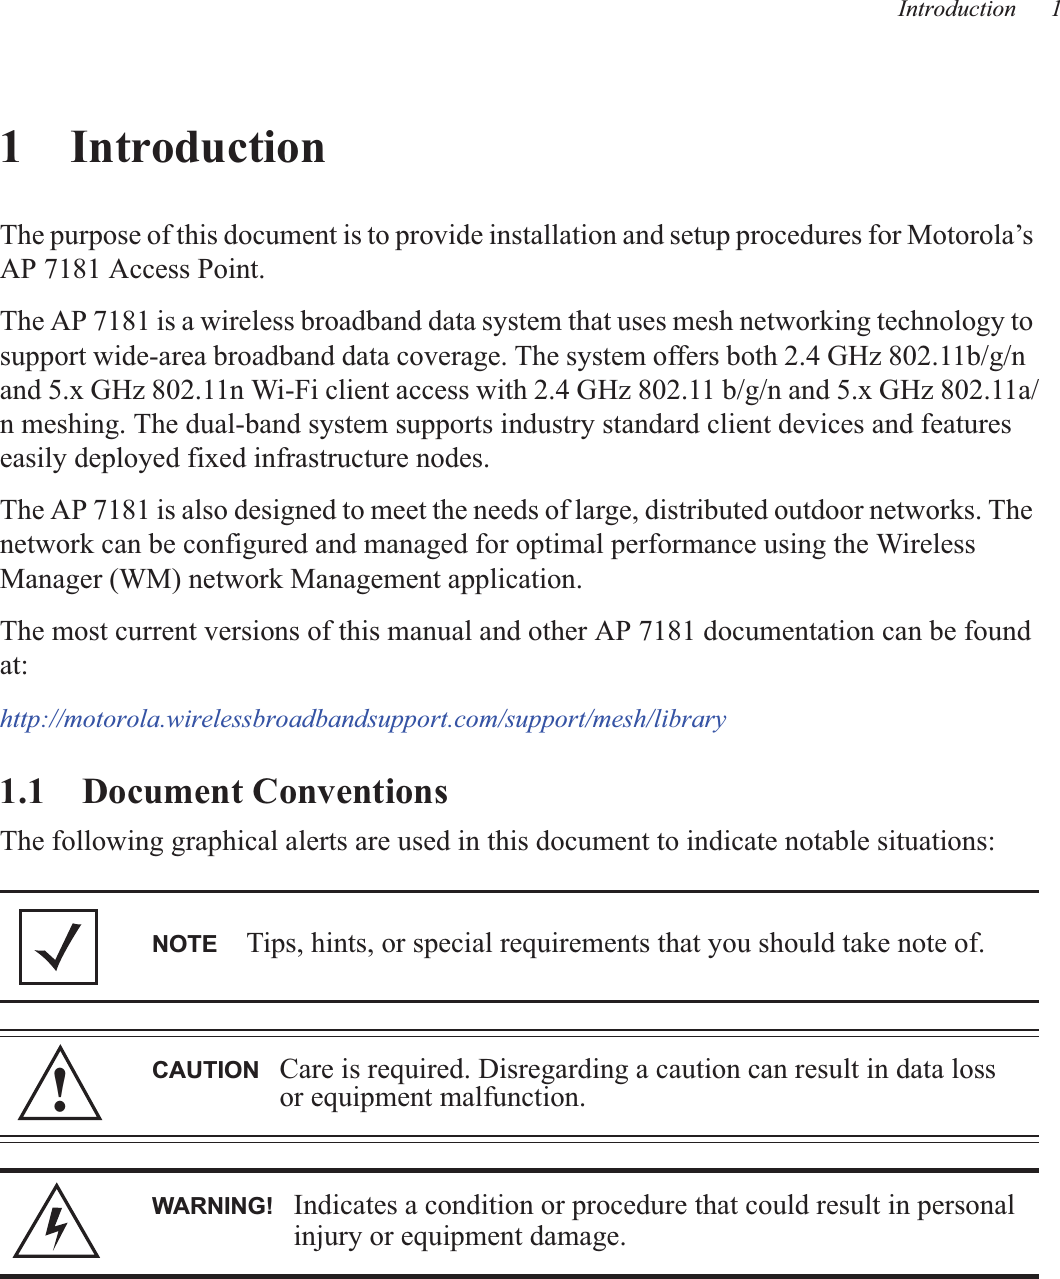 Introduction 11IntroductionThe purpose of this document is to provide installation and setup procedures for Motorola’s AP 7181 Access Point.The AP 7181 is a wireless broadband data system that uses mesh networking technology to support wide-area broadband data coverage. The system offers both 2.4 GHz 802.11b/g/n  and 5.x GHz 802.11n Wi-Fi client access with 2.4 GHz 802.11 b/g/n and 5.x GHz 802.11a/n meshing. The dual-band system supports industry standard client devices and features easily deployed fixed infrastructure nodes.The AP 7181 is also designed to meet the needs of large, distributed outdoor networks. The network can be configured and managed for optimal performance using the Wireless Manager (WM) network Management application.The most current versions of this manual and other AP 7181 documentation can be found at:http://motorola.wirelessbroadbandsupport.com/support/mesh/library1.1    Document ConventionsThe following graphical alerts are used in this document to indicate notable situations: NOTE Tips, hints, or special requirements that you should take note of.CAUTION Care is required. Disregarding a caution can result in data loss or equipment malfunction.WARNING! Indicates a condition or procedure that could result in personal injury or equipment damage.!